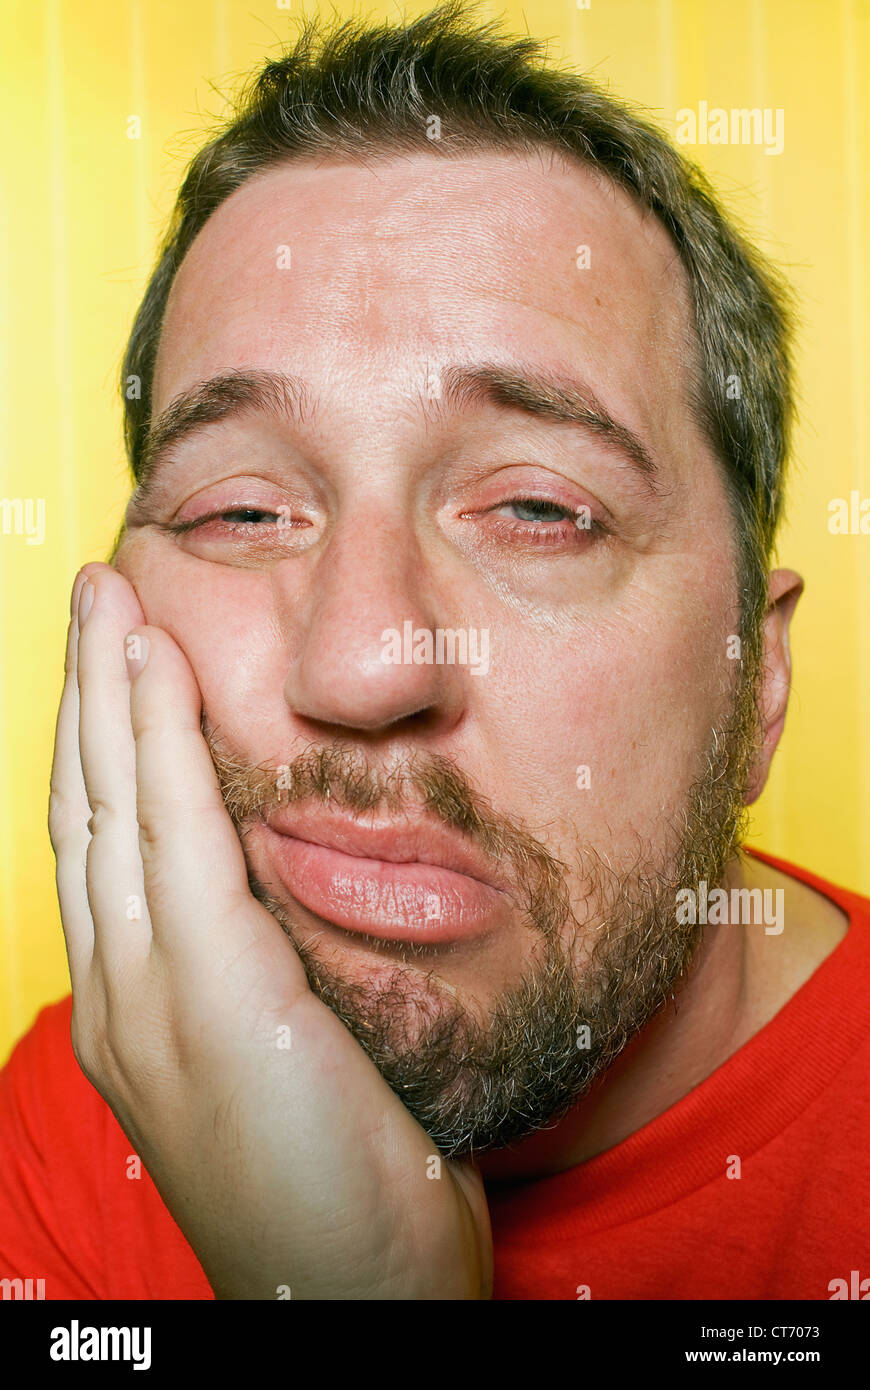 A man falling asleep while leaning on his hand. (30's, 40's, thirties, forties.) Stock Photo